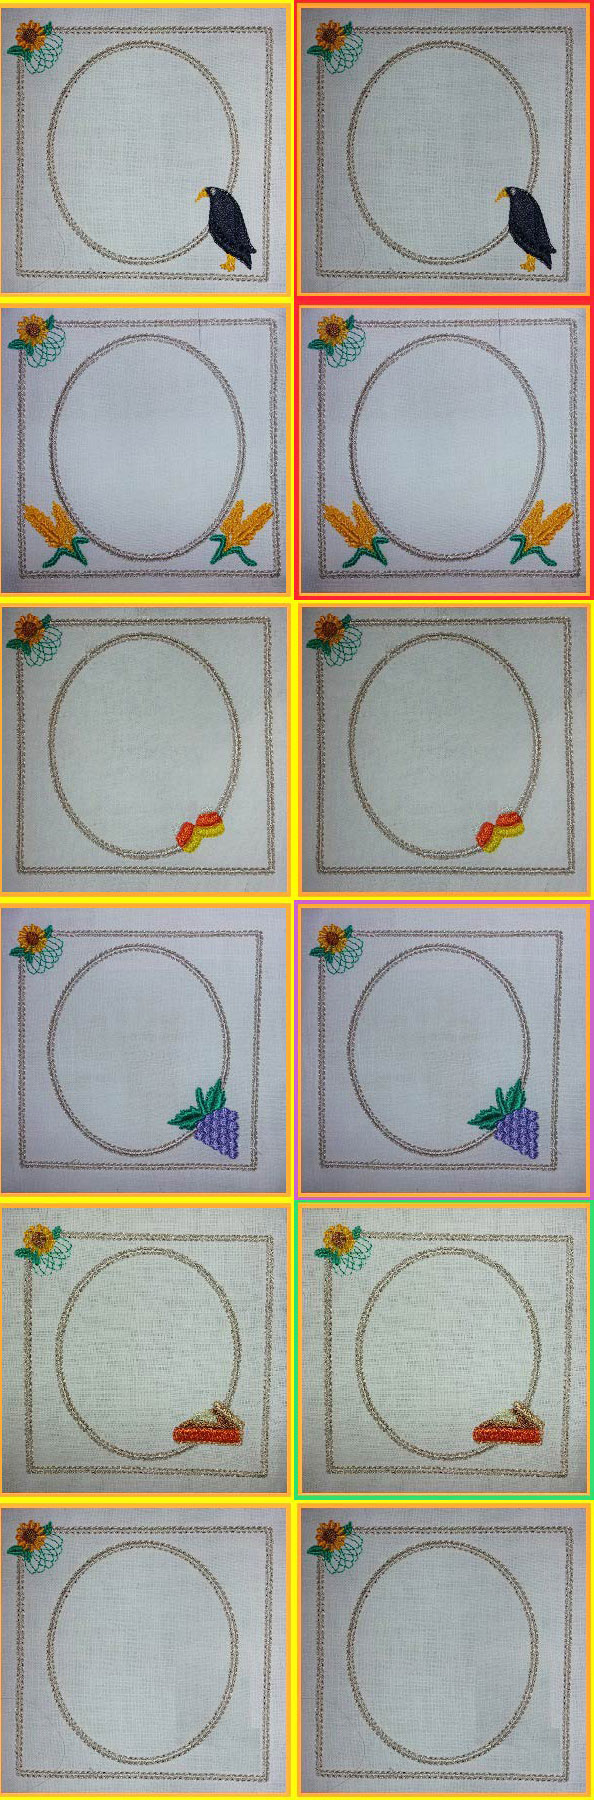 Fall Frames 2 Embroidery Machine Design Details